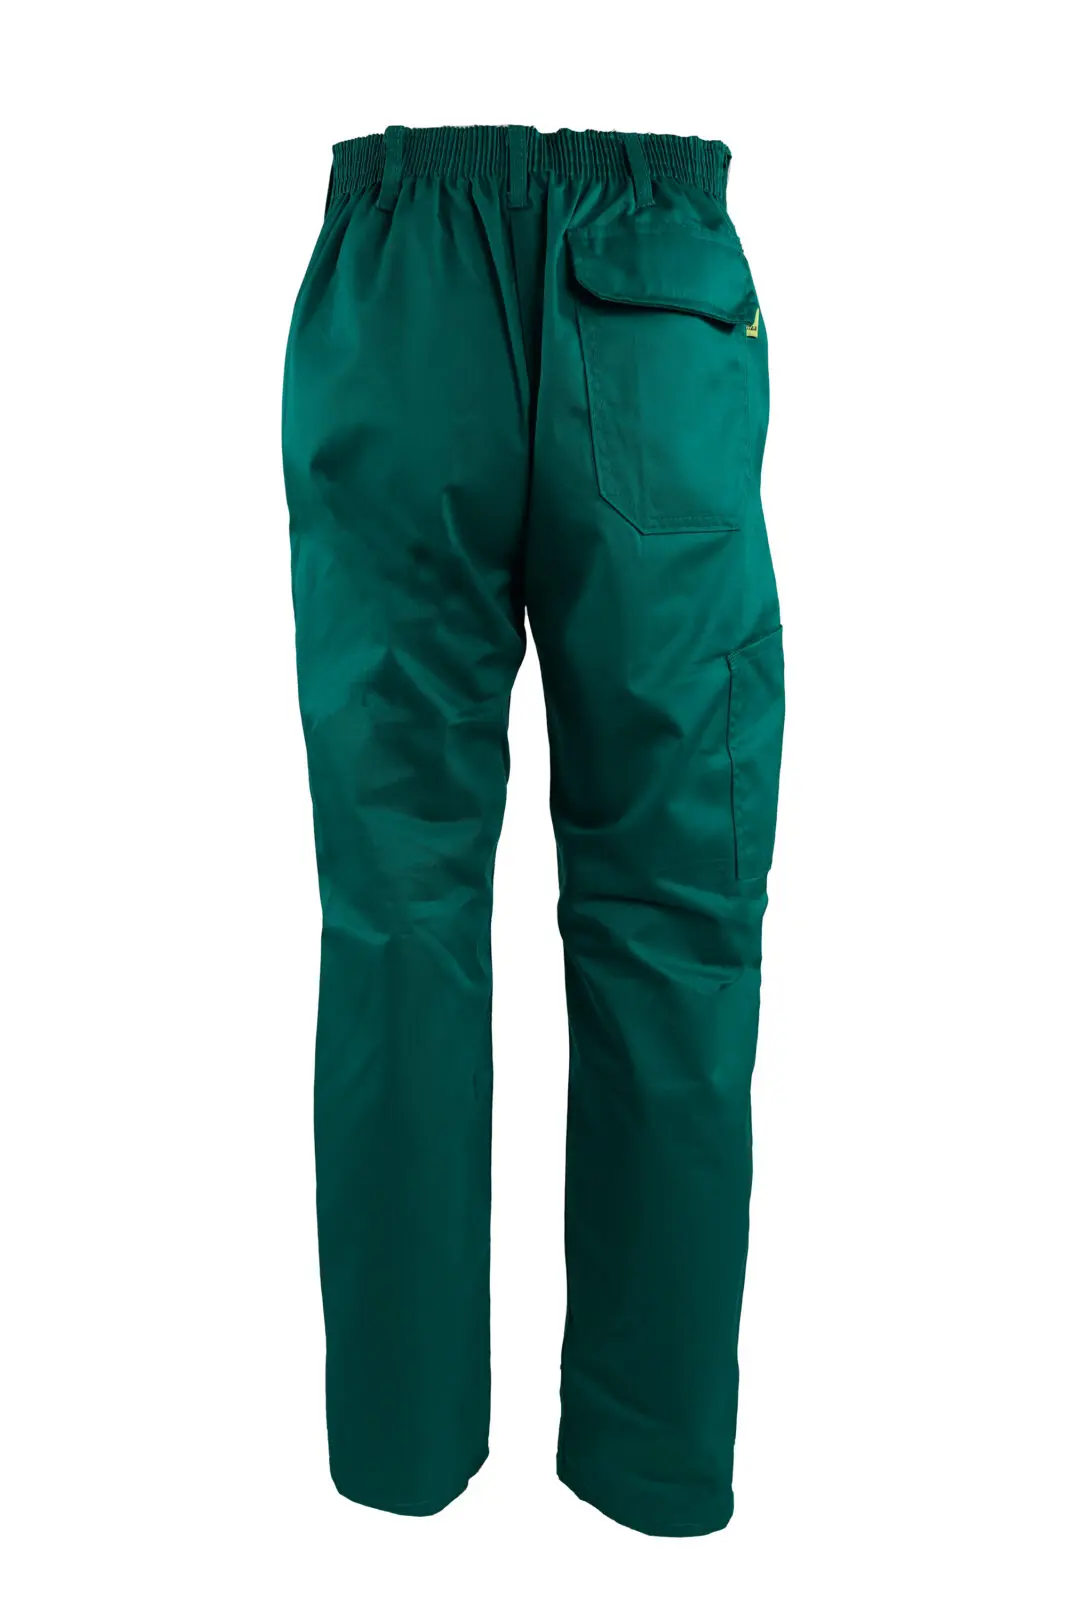 BP® Cotton basic work trousers with knee pad pockets | 47/48 |  1486-060-74000016